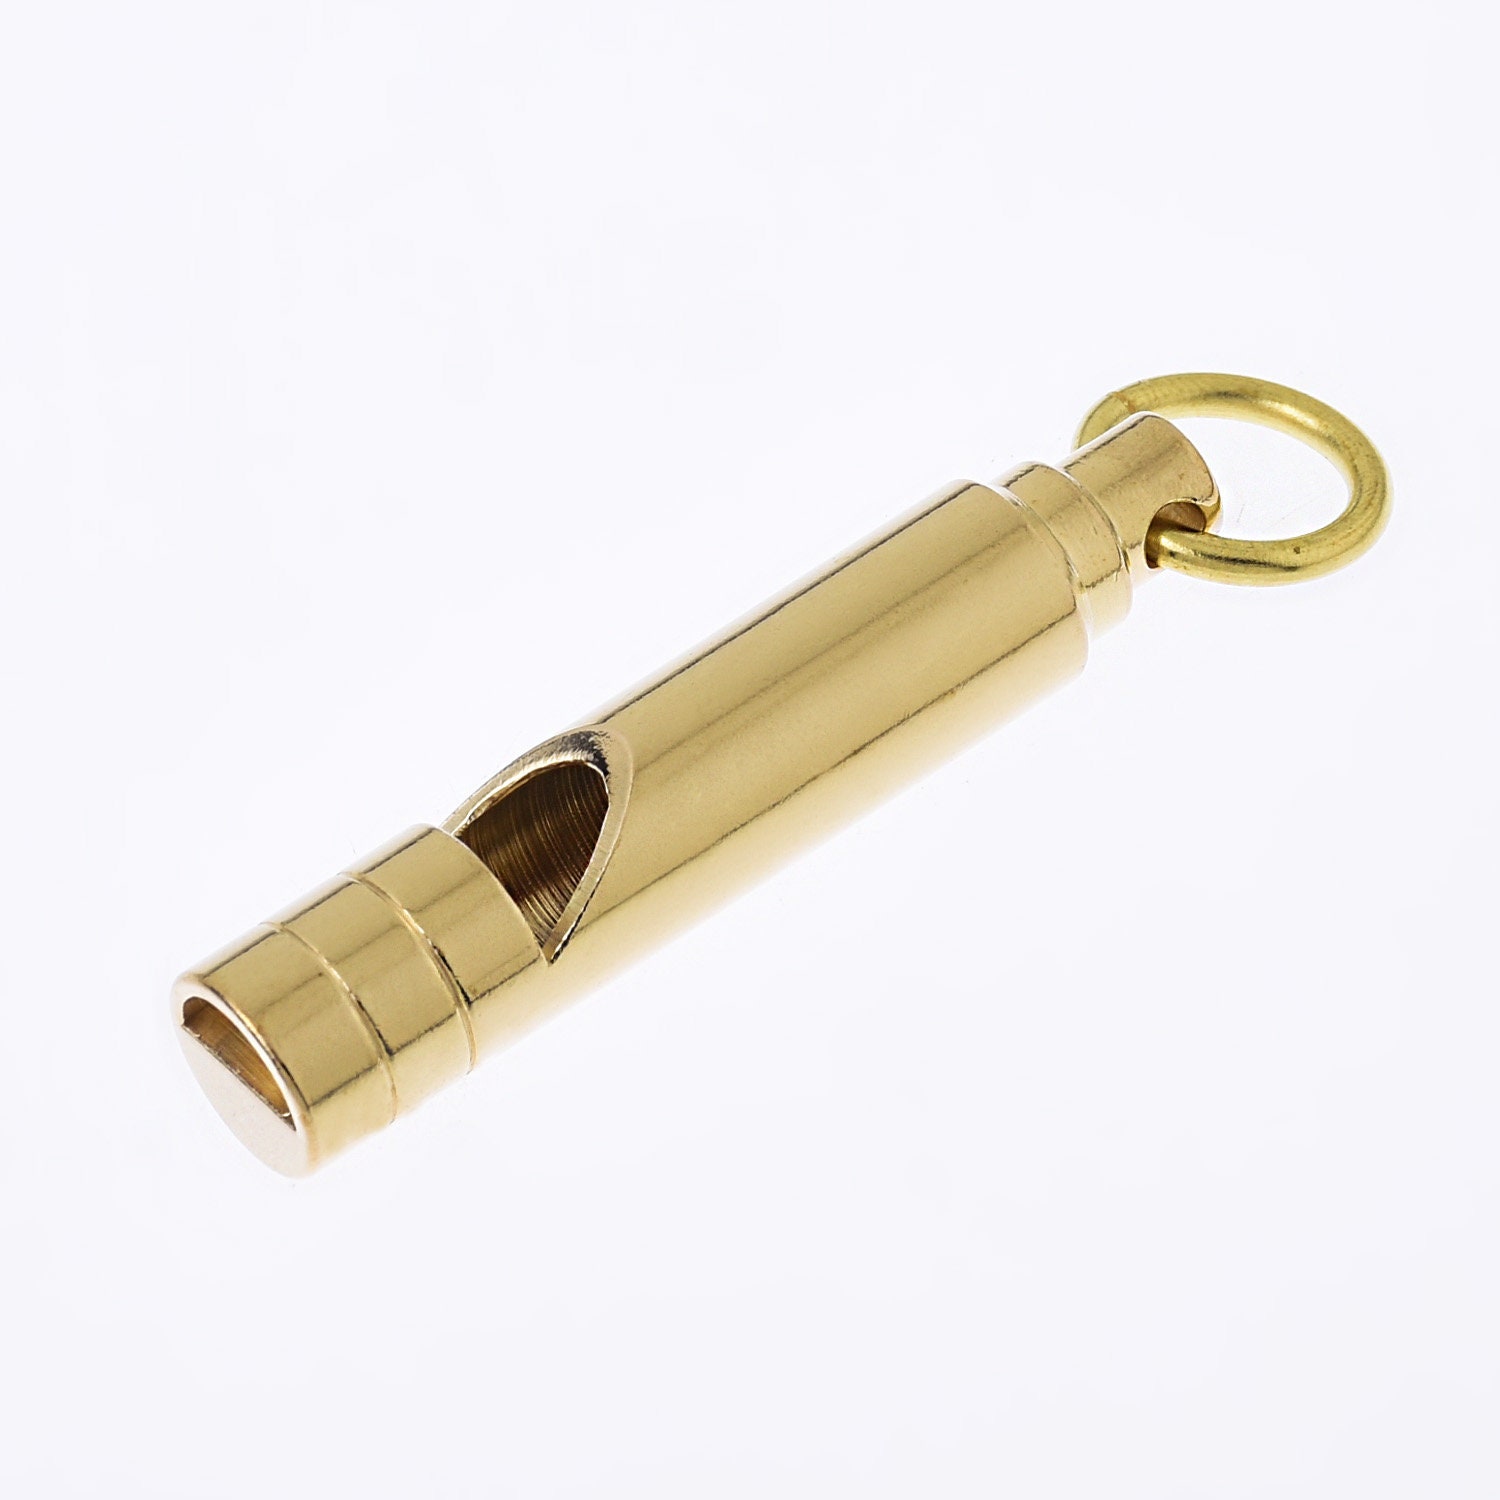 Shop for and Buy Whistle Keychain Aluminum Tube - Bulk Pack at